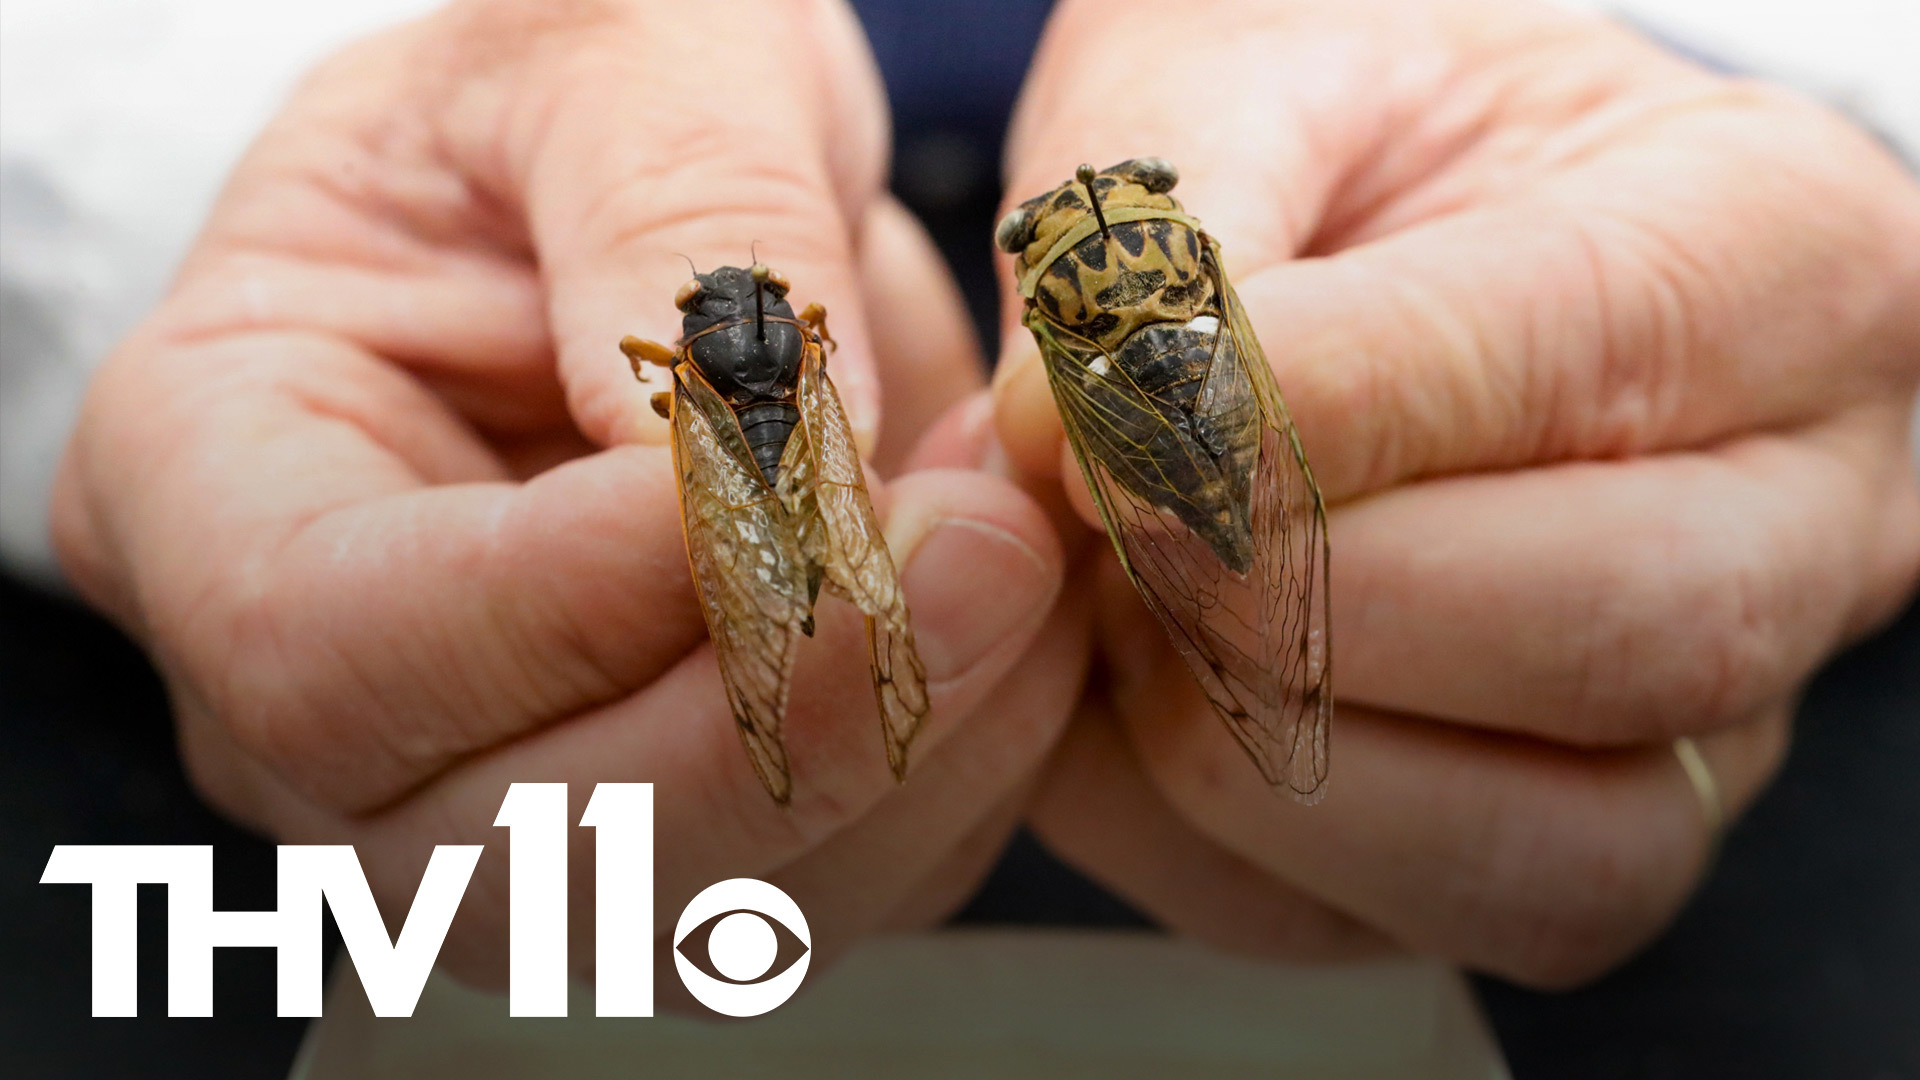 This spring, residents in 15 eastern and central U.S. states won't be able to miss the mass emergence of billions of cicadas.